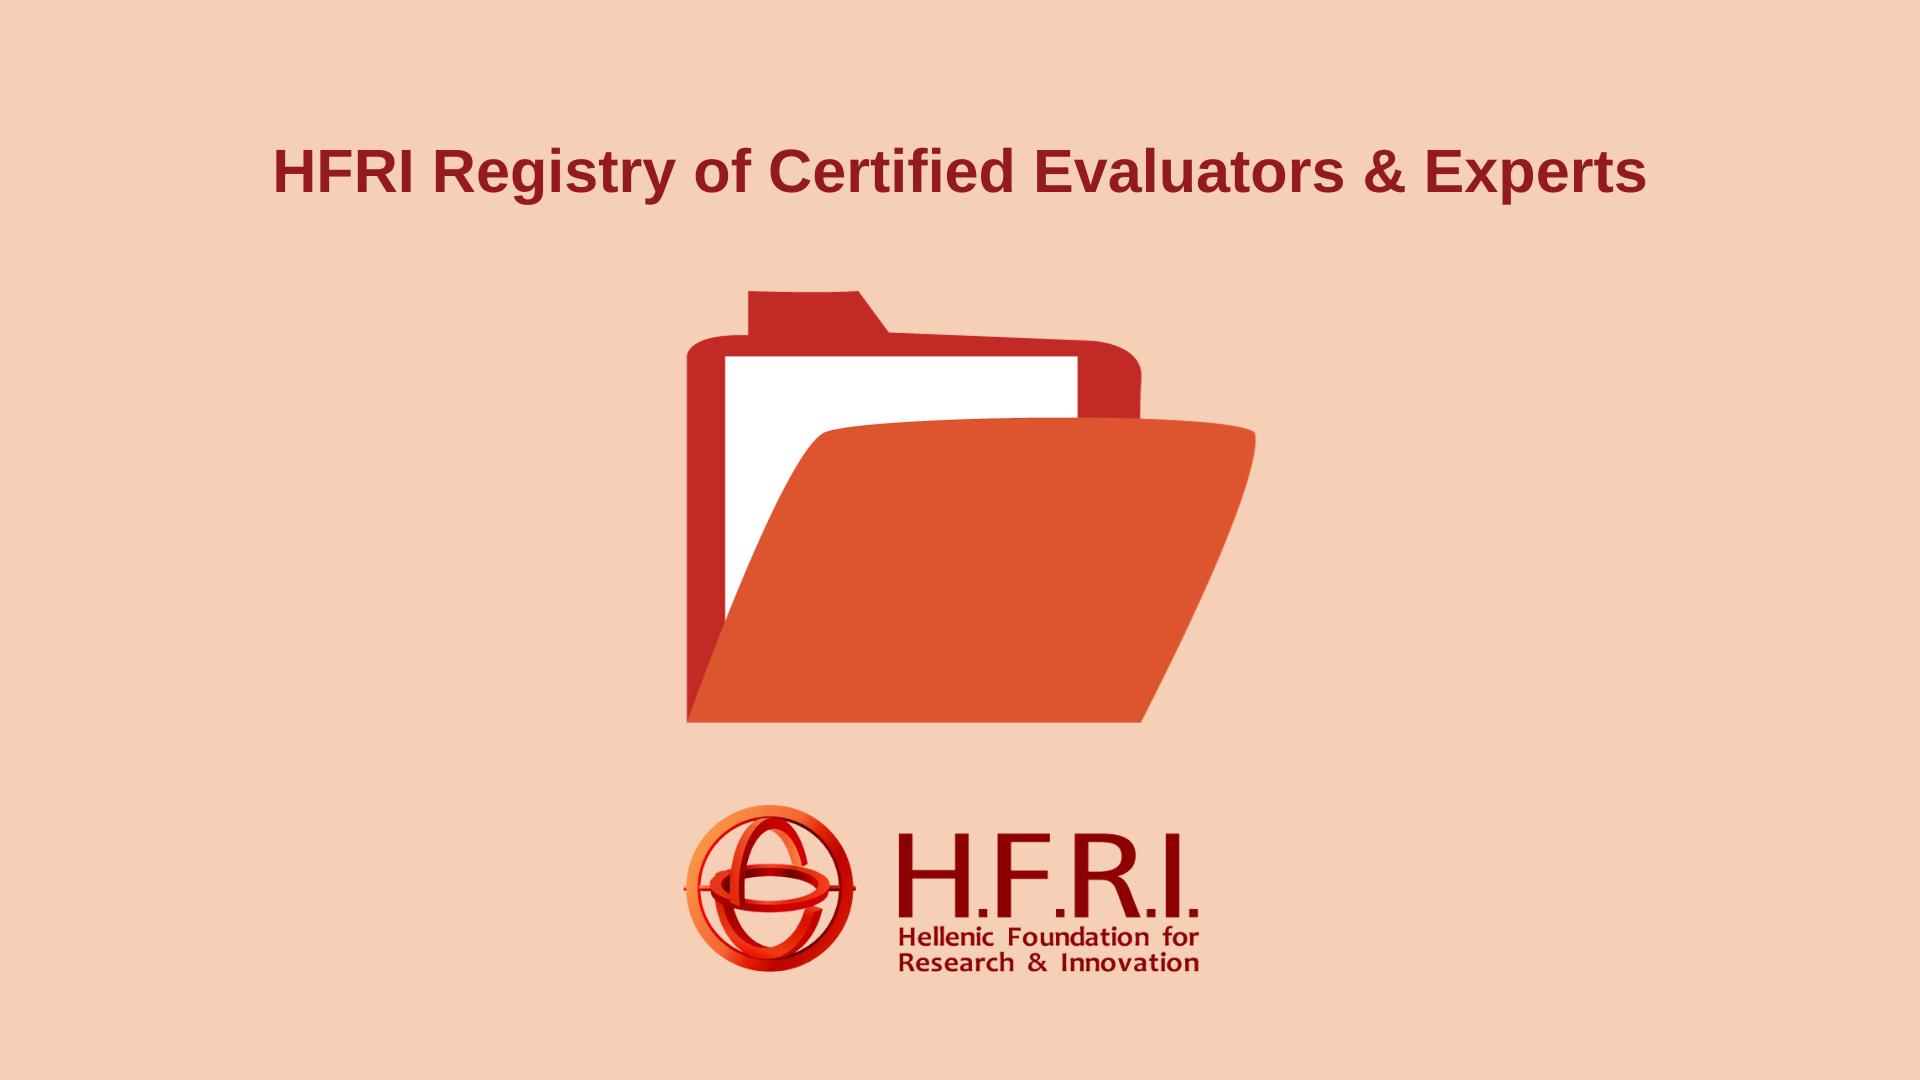 Call for expression of interest to participate in the Register of Certified Evaluators-Experts of the Hellenic Foundation for Research and Innovation (HFRI)